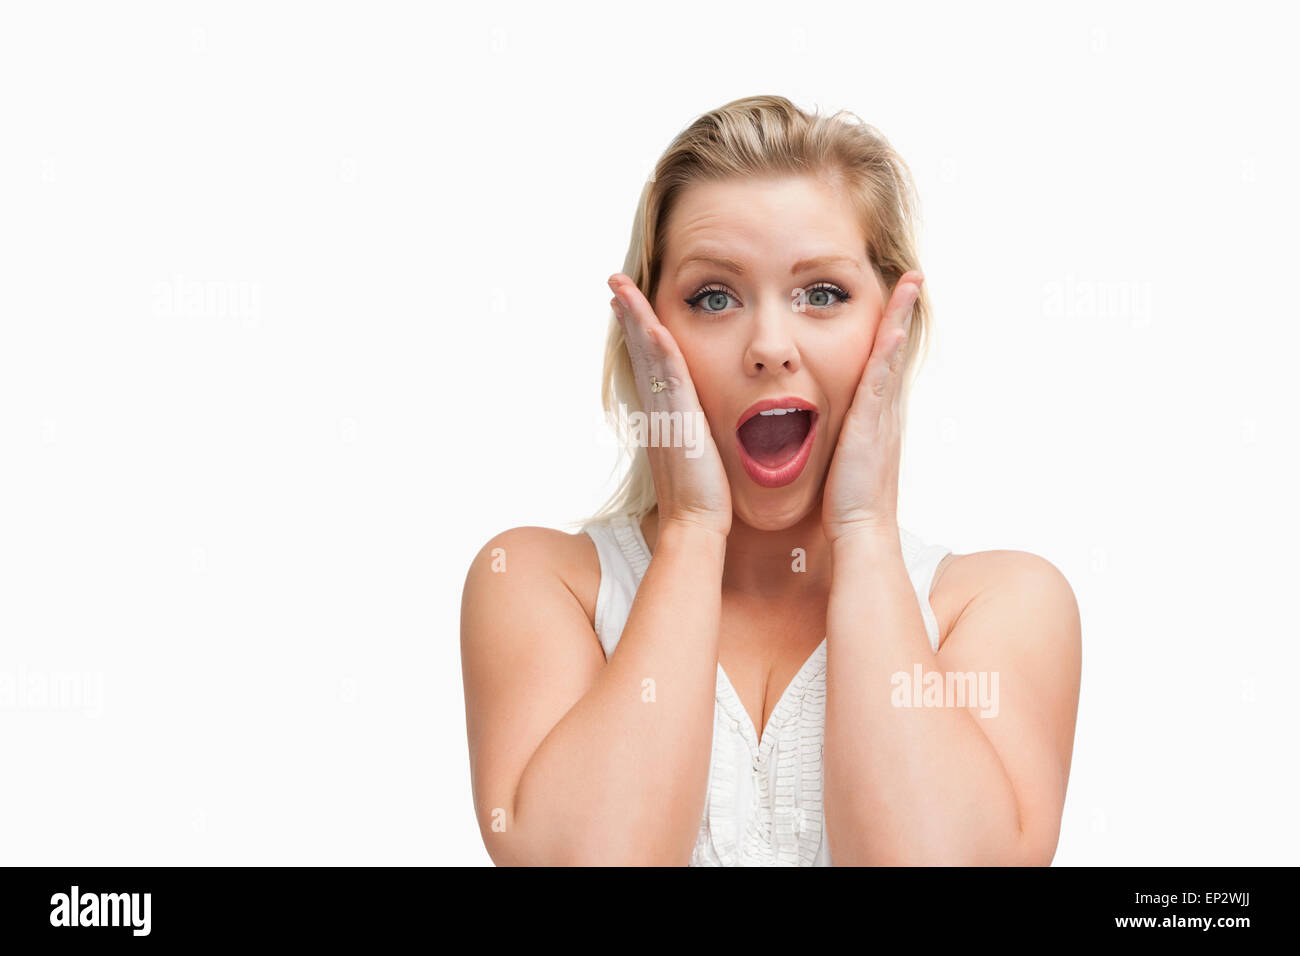 Surprised blonde woman putting her hands on her cheeks Stock Photo